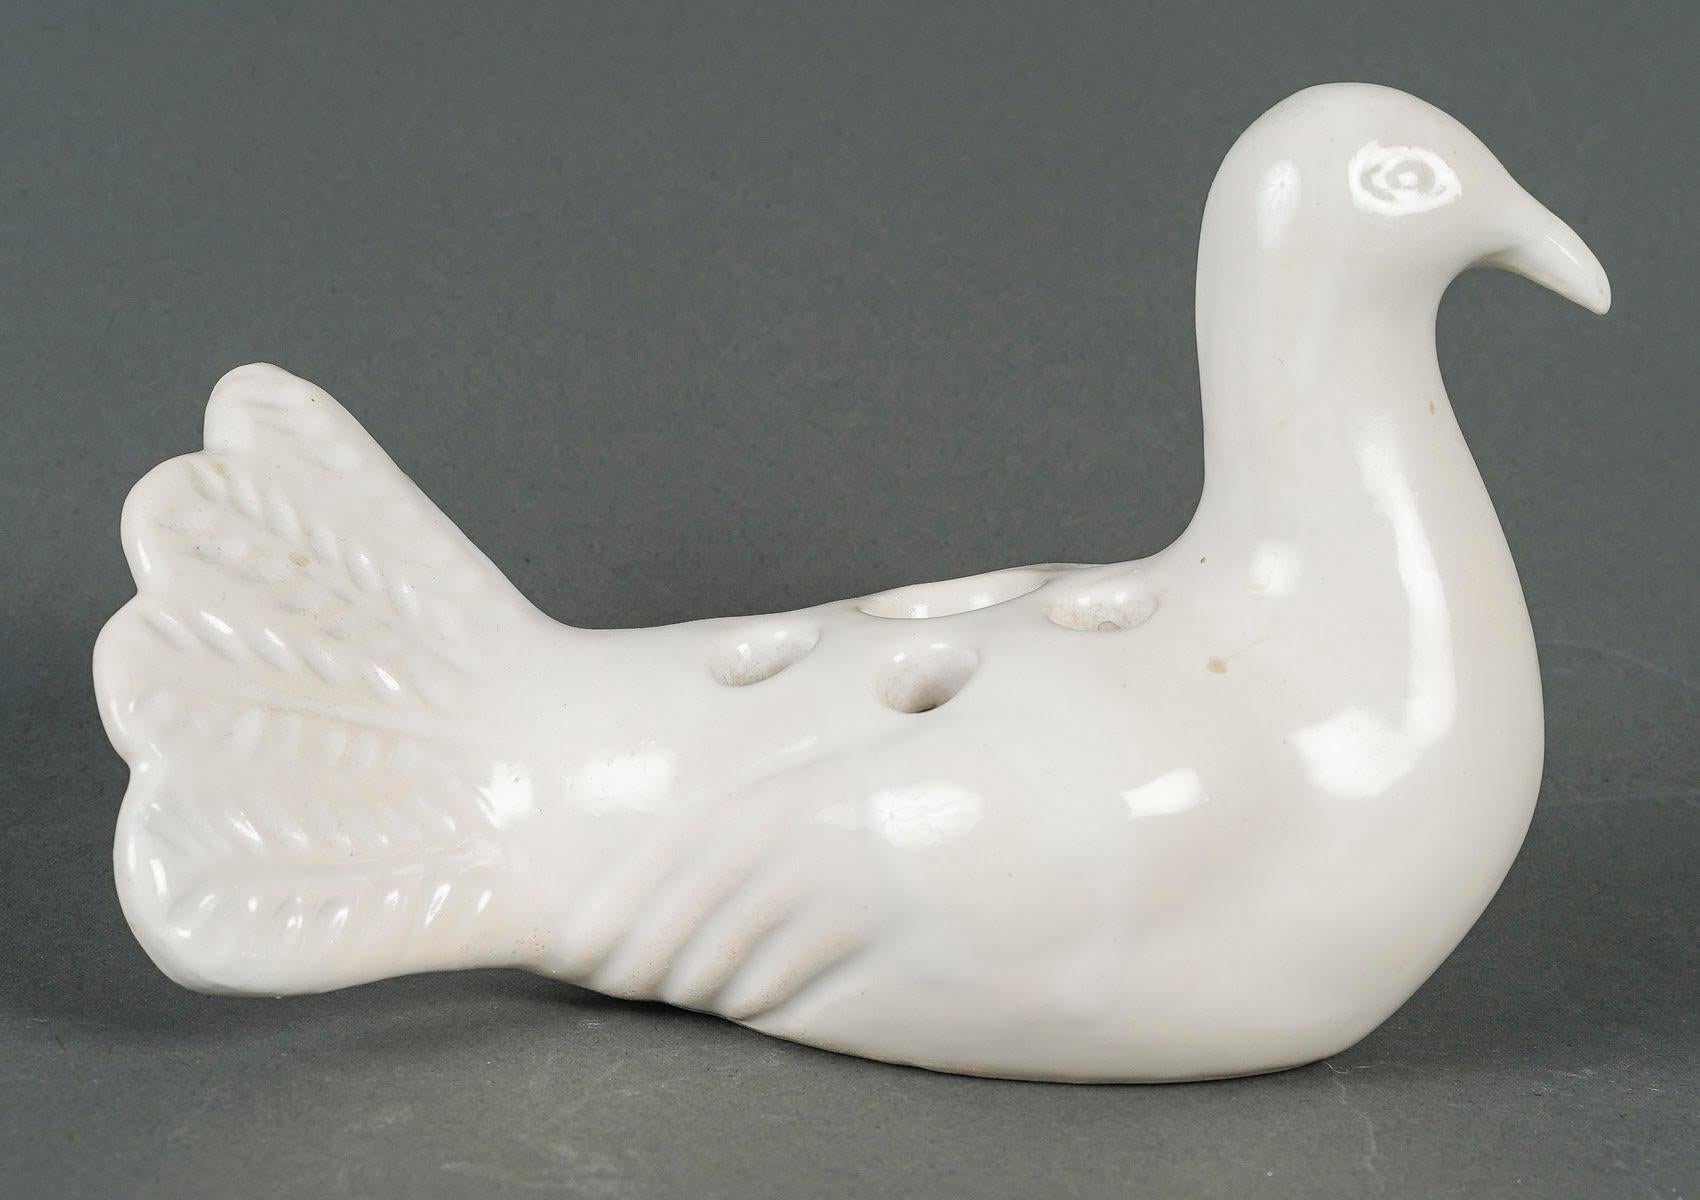 White Porcelain Brush Display, 20th Century, Art Nouveau period.

Brush display stand for storing brushes after or during the painting of a picture, early 20th century white porcelain, Art Nouveau, Mark underneath, Saint Paul de Vence.
h: 10cm, w: